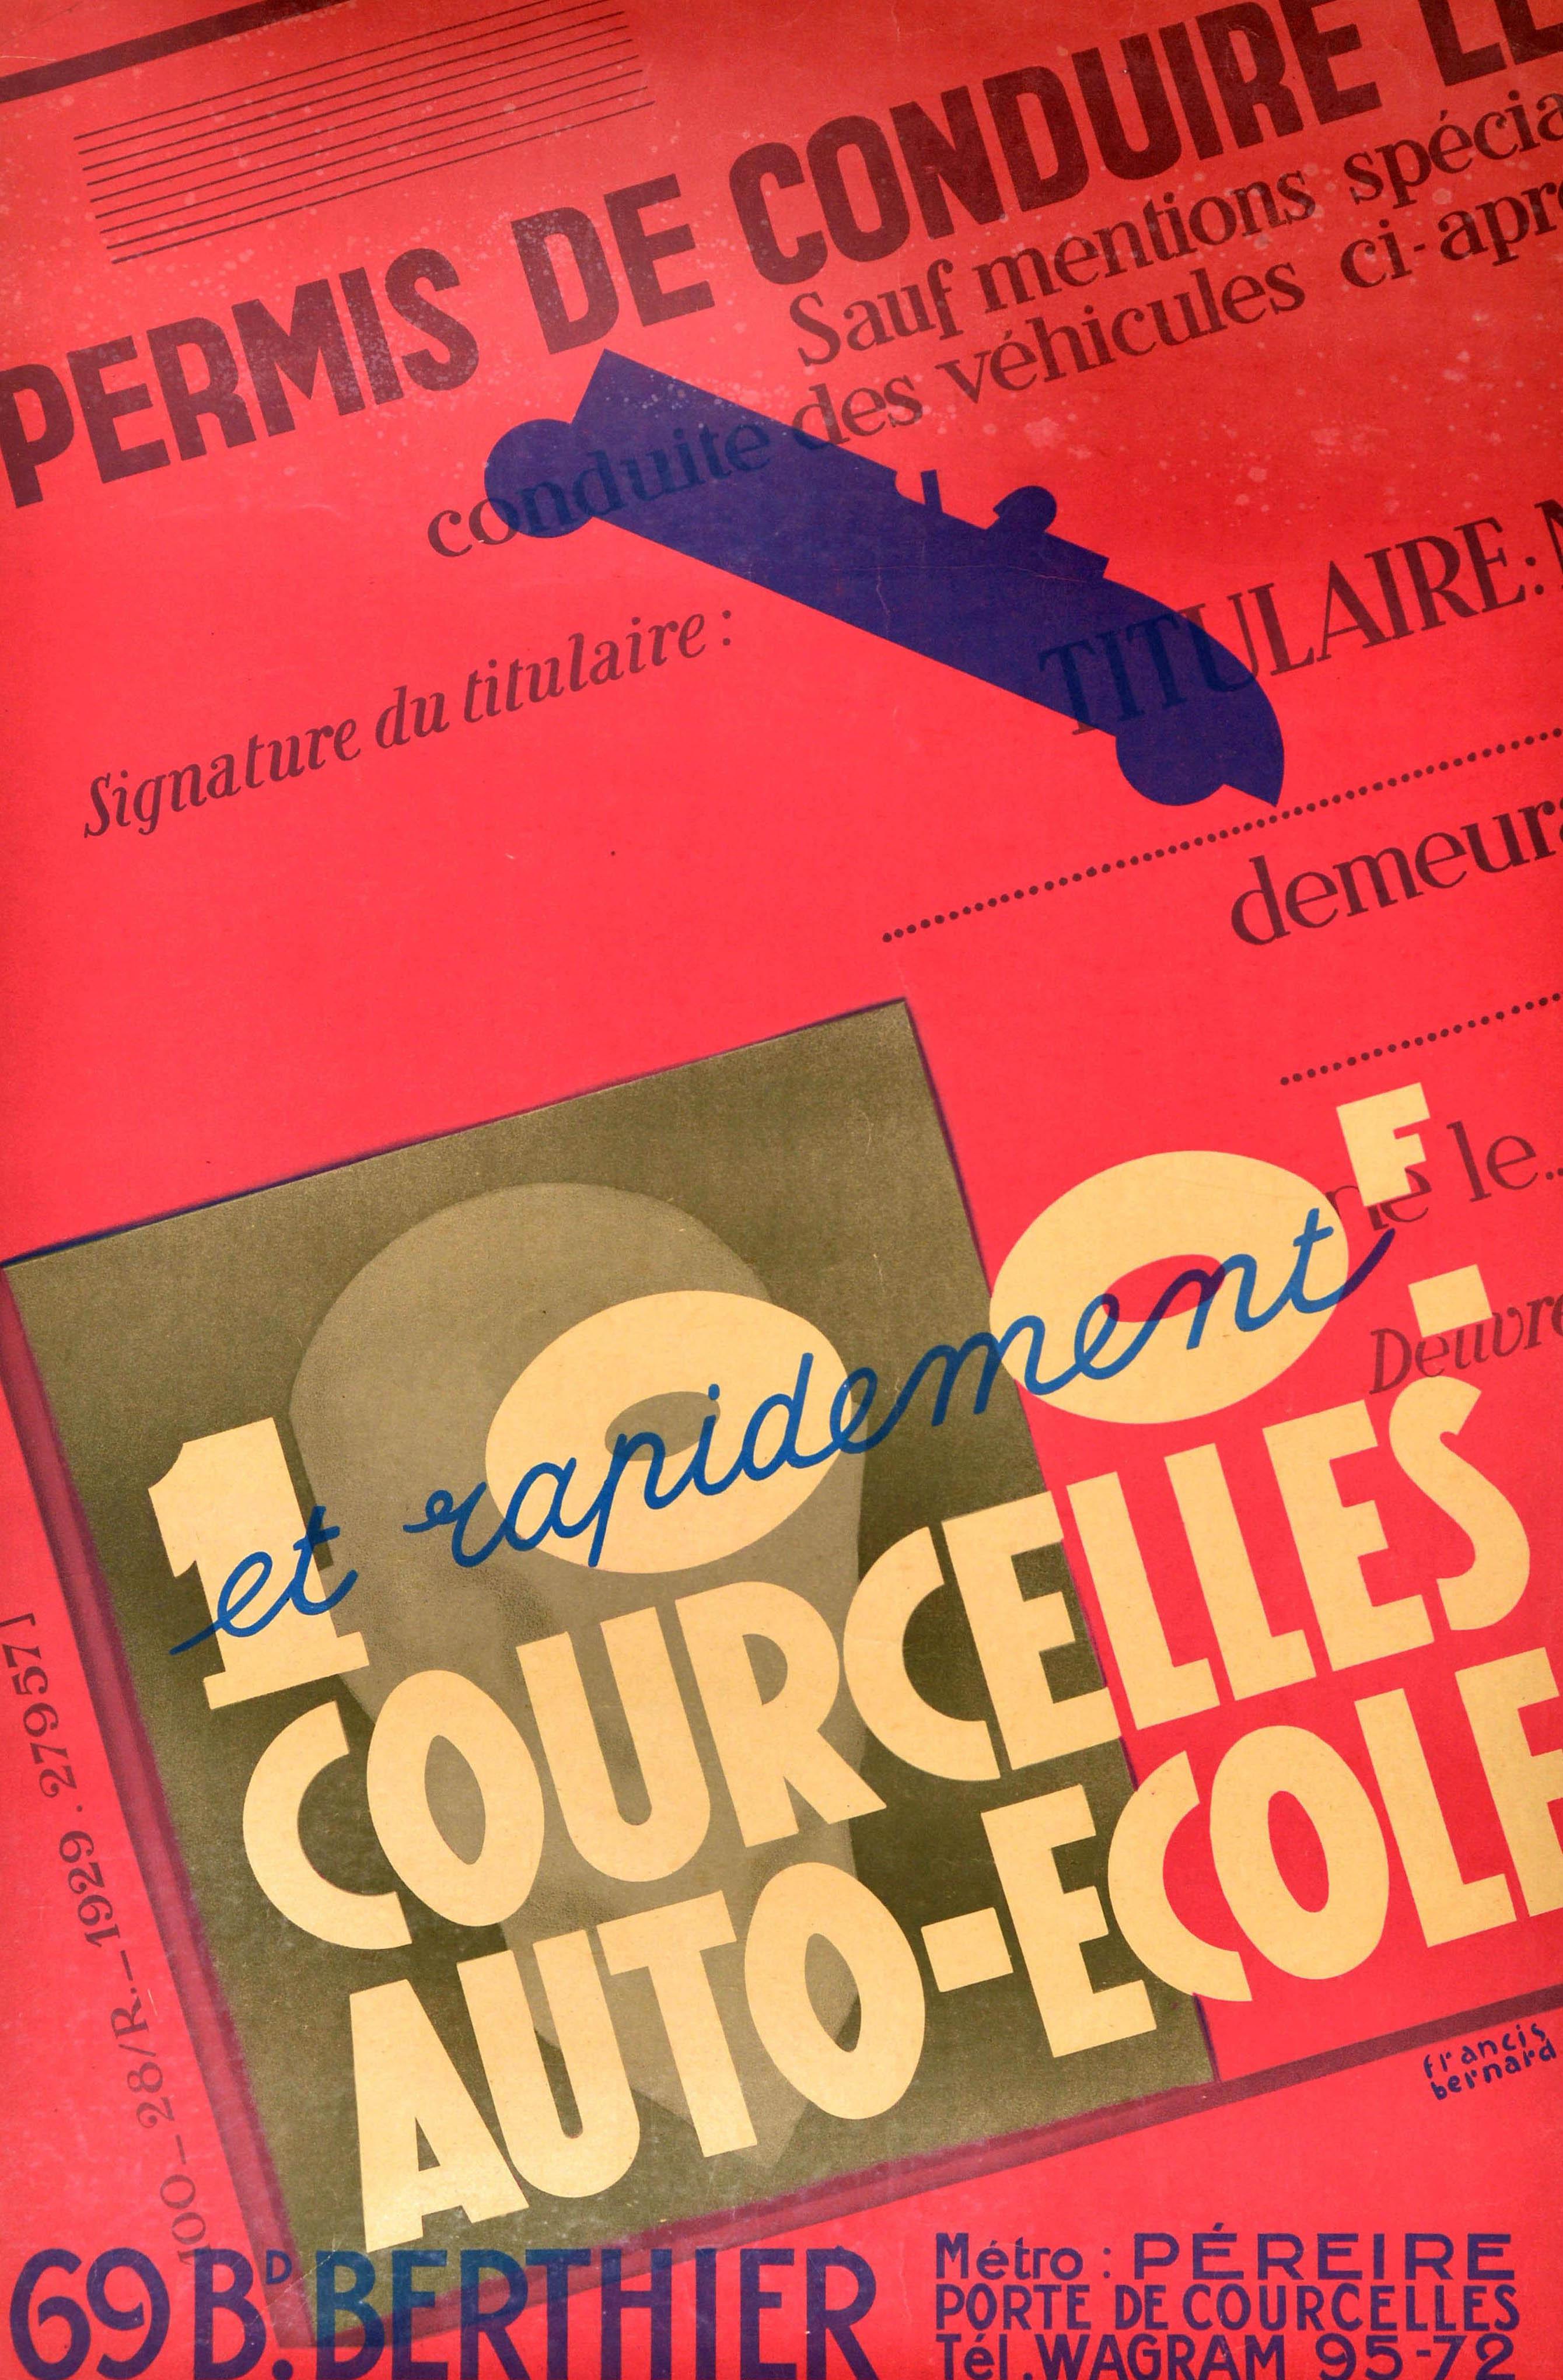 Original Vintage Advertising Poster Driving School Courcelles Auto Ecole Design - Print by Unknown